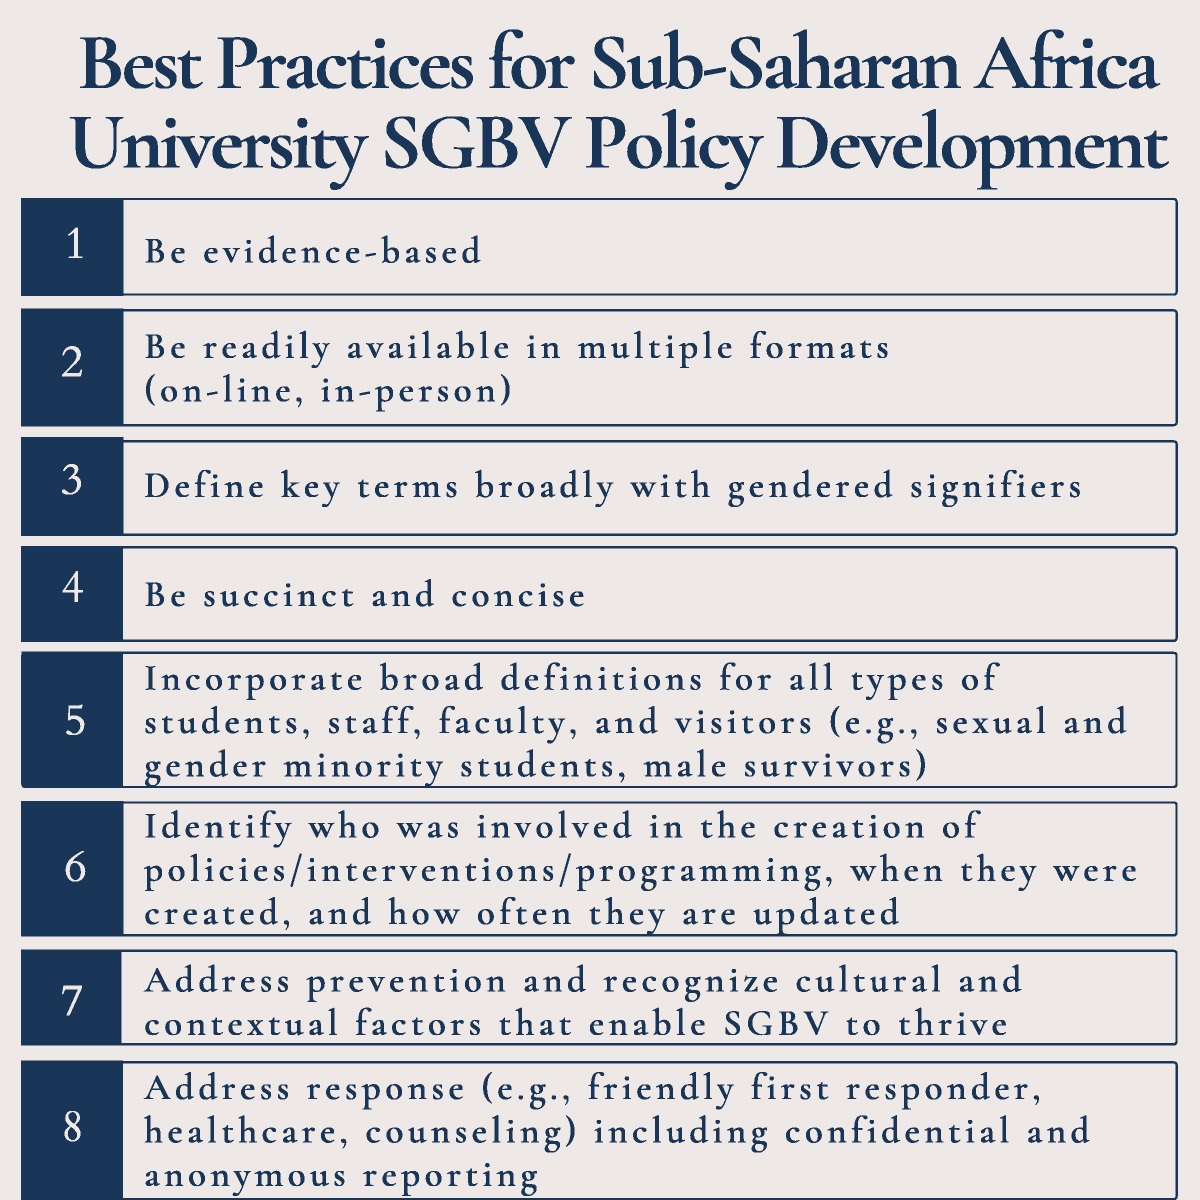 University Sexual and Gender-Based Violence Policies in Sub-Saharan Africa: Exploring Best Practices